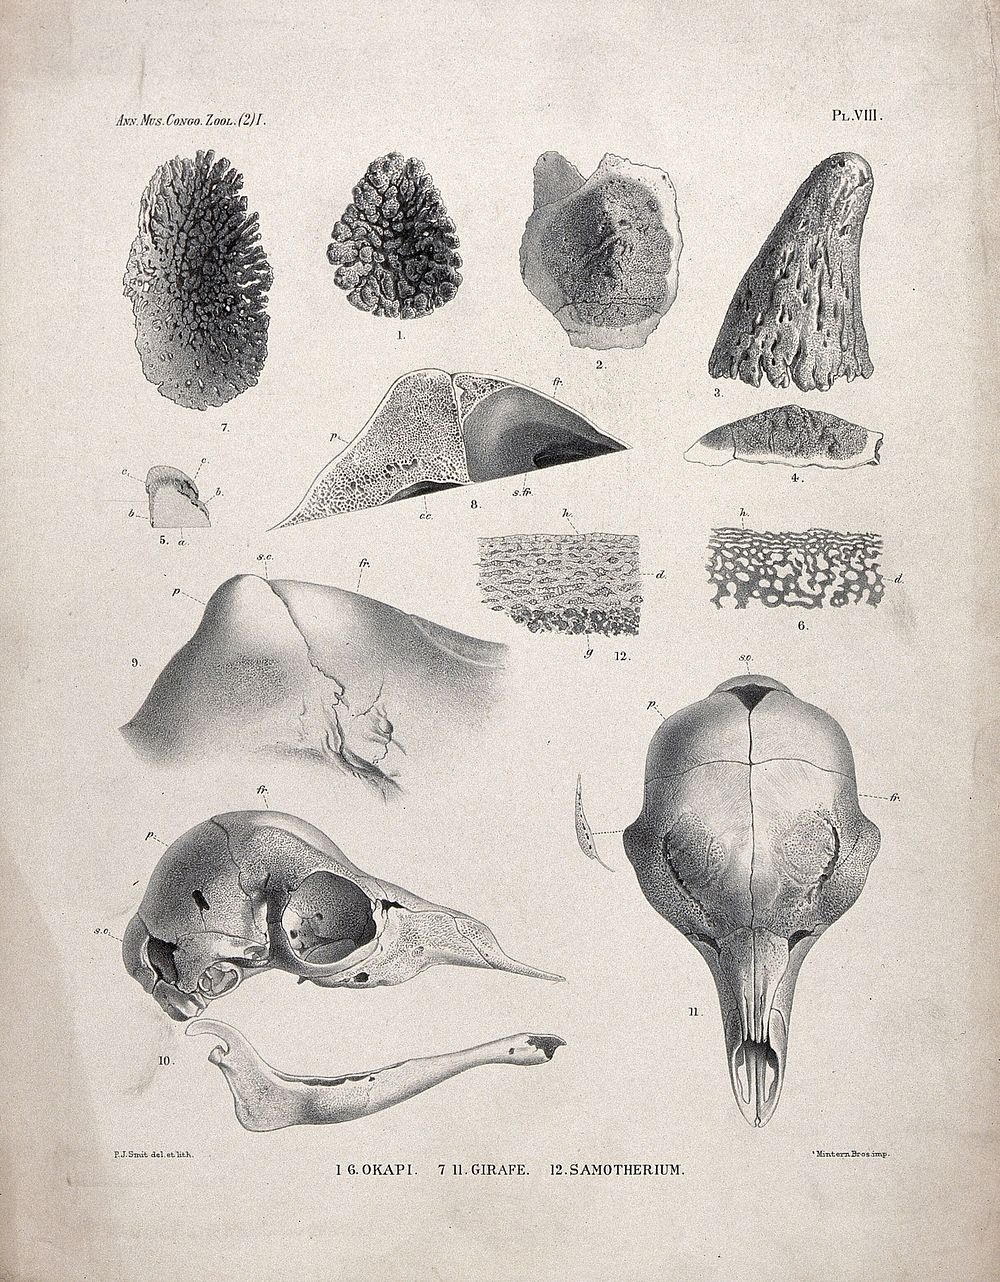 Bones and cross-sections of bones of an okapi, a giraffe and a samotherium. Lithograph by P. J. Smit.